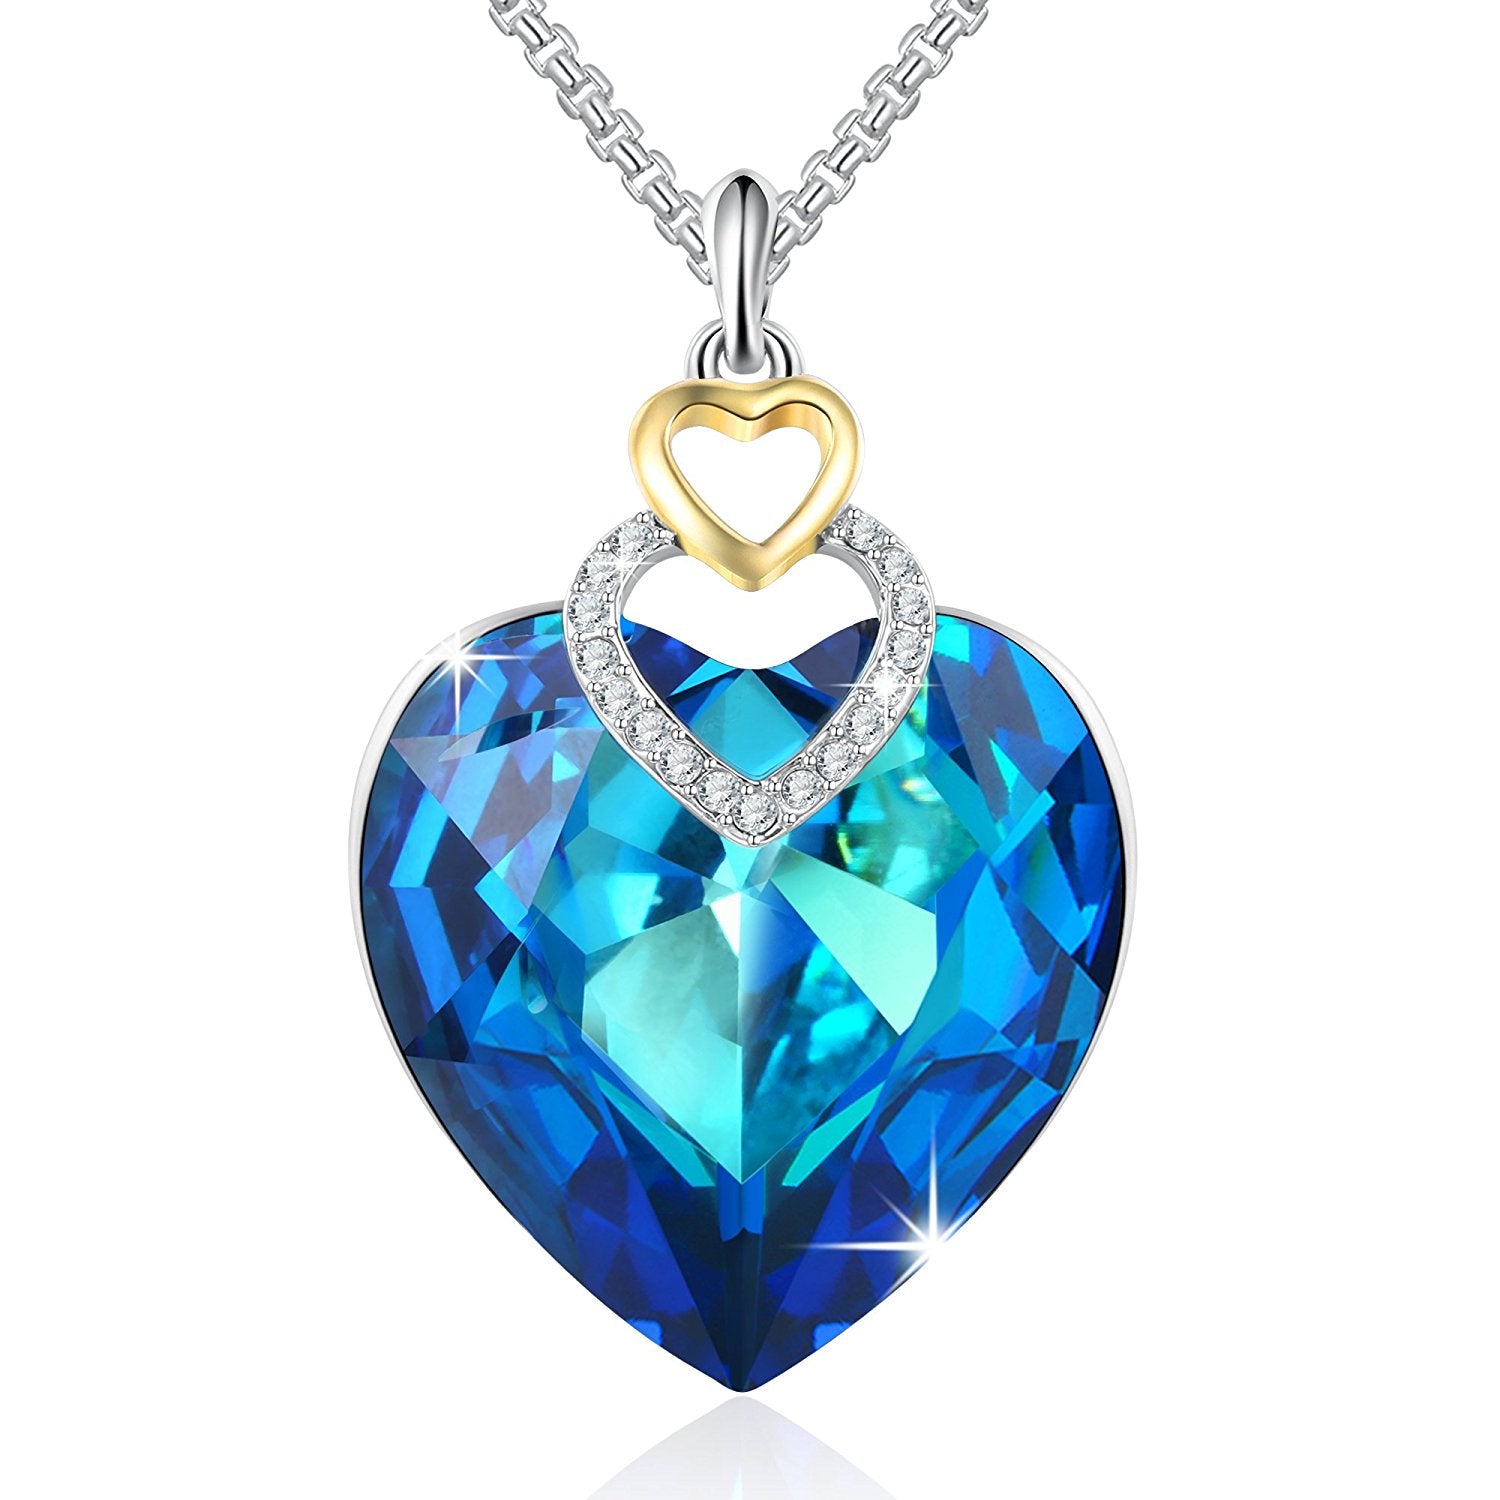 Fearless Love Blue Heart Pendant Crystal Necklace With Swarovski Crys Hughdeal4less